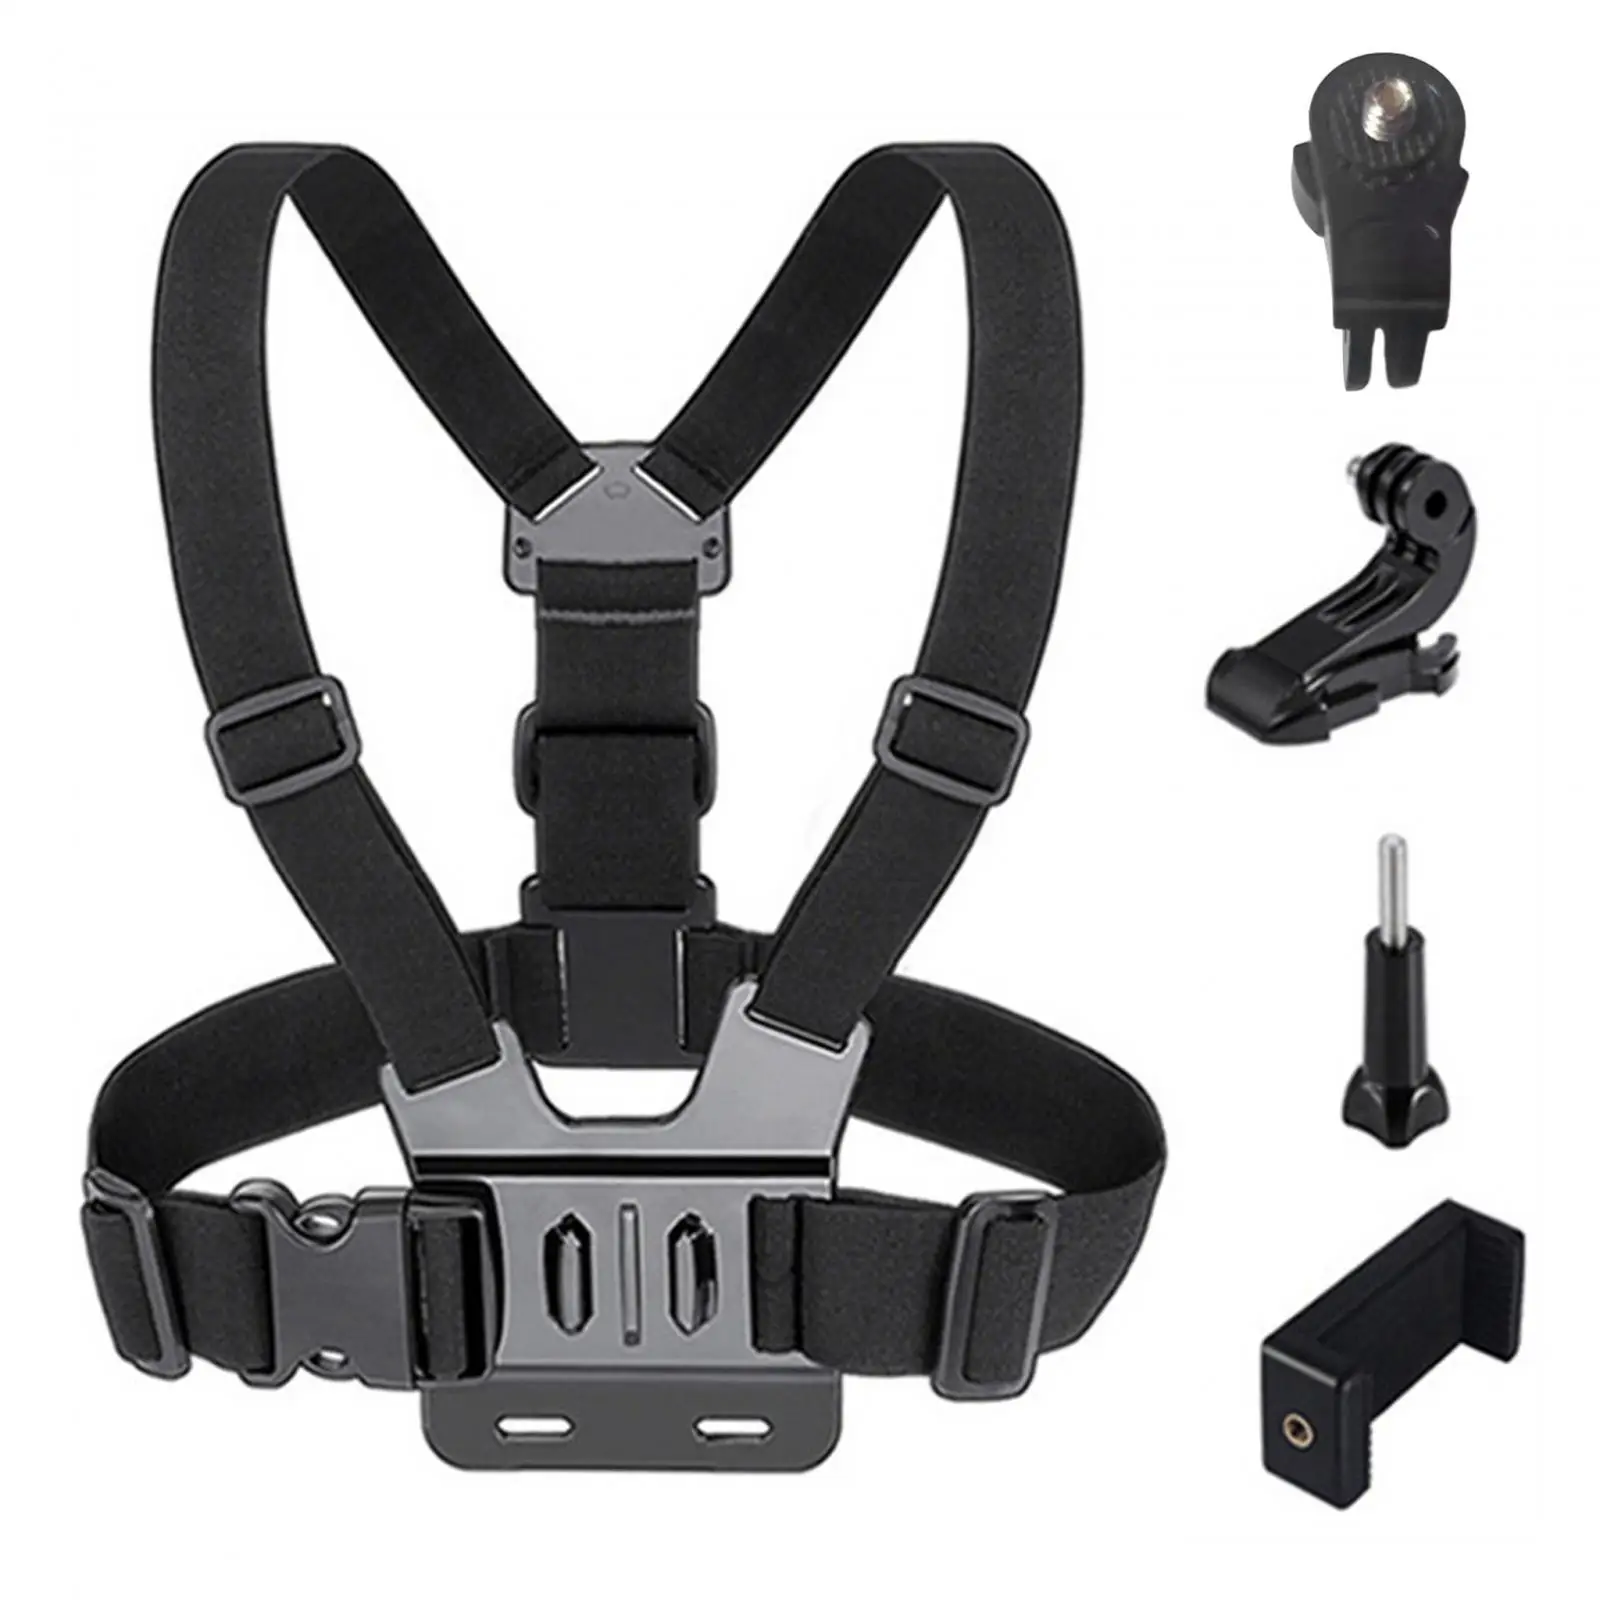 Mobile Phone Chest Strap Mount Cellphone Video Accessories Adjustable for Biking Snowboarding Vlogging Fishing Outdoor Sports